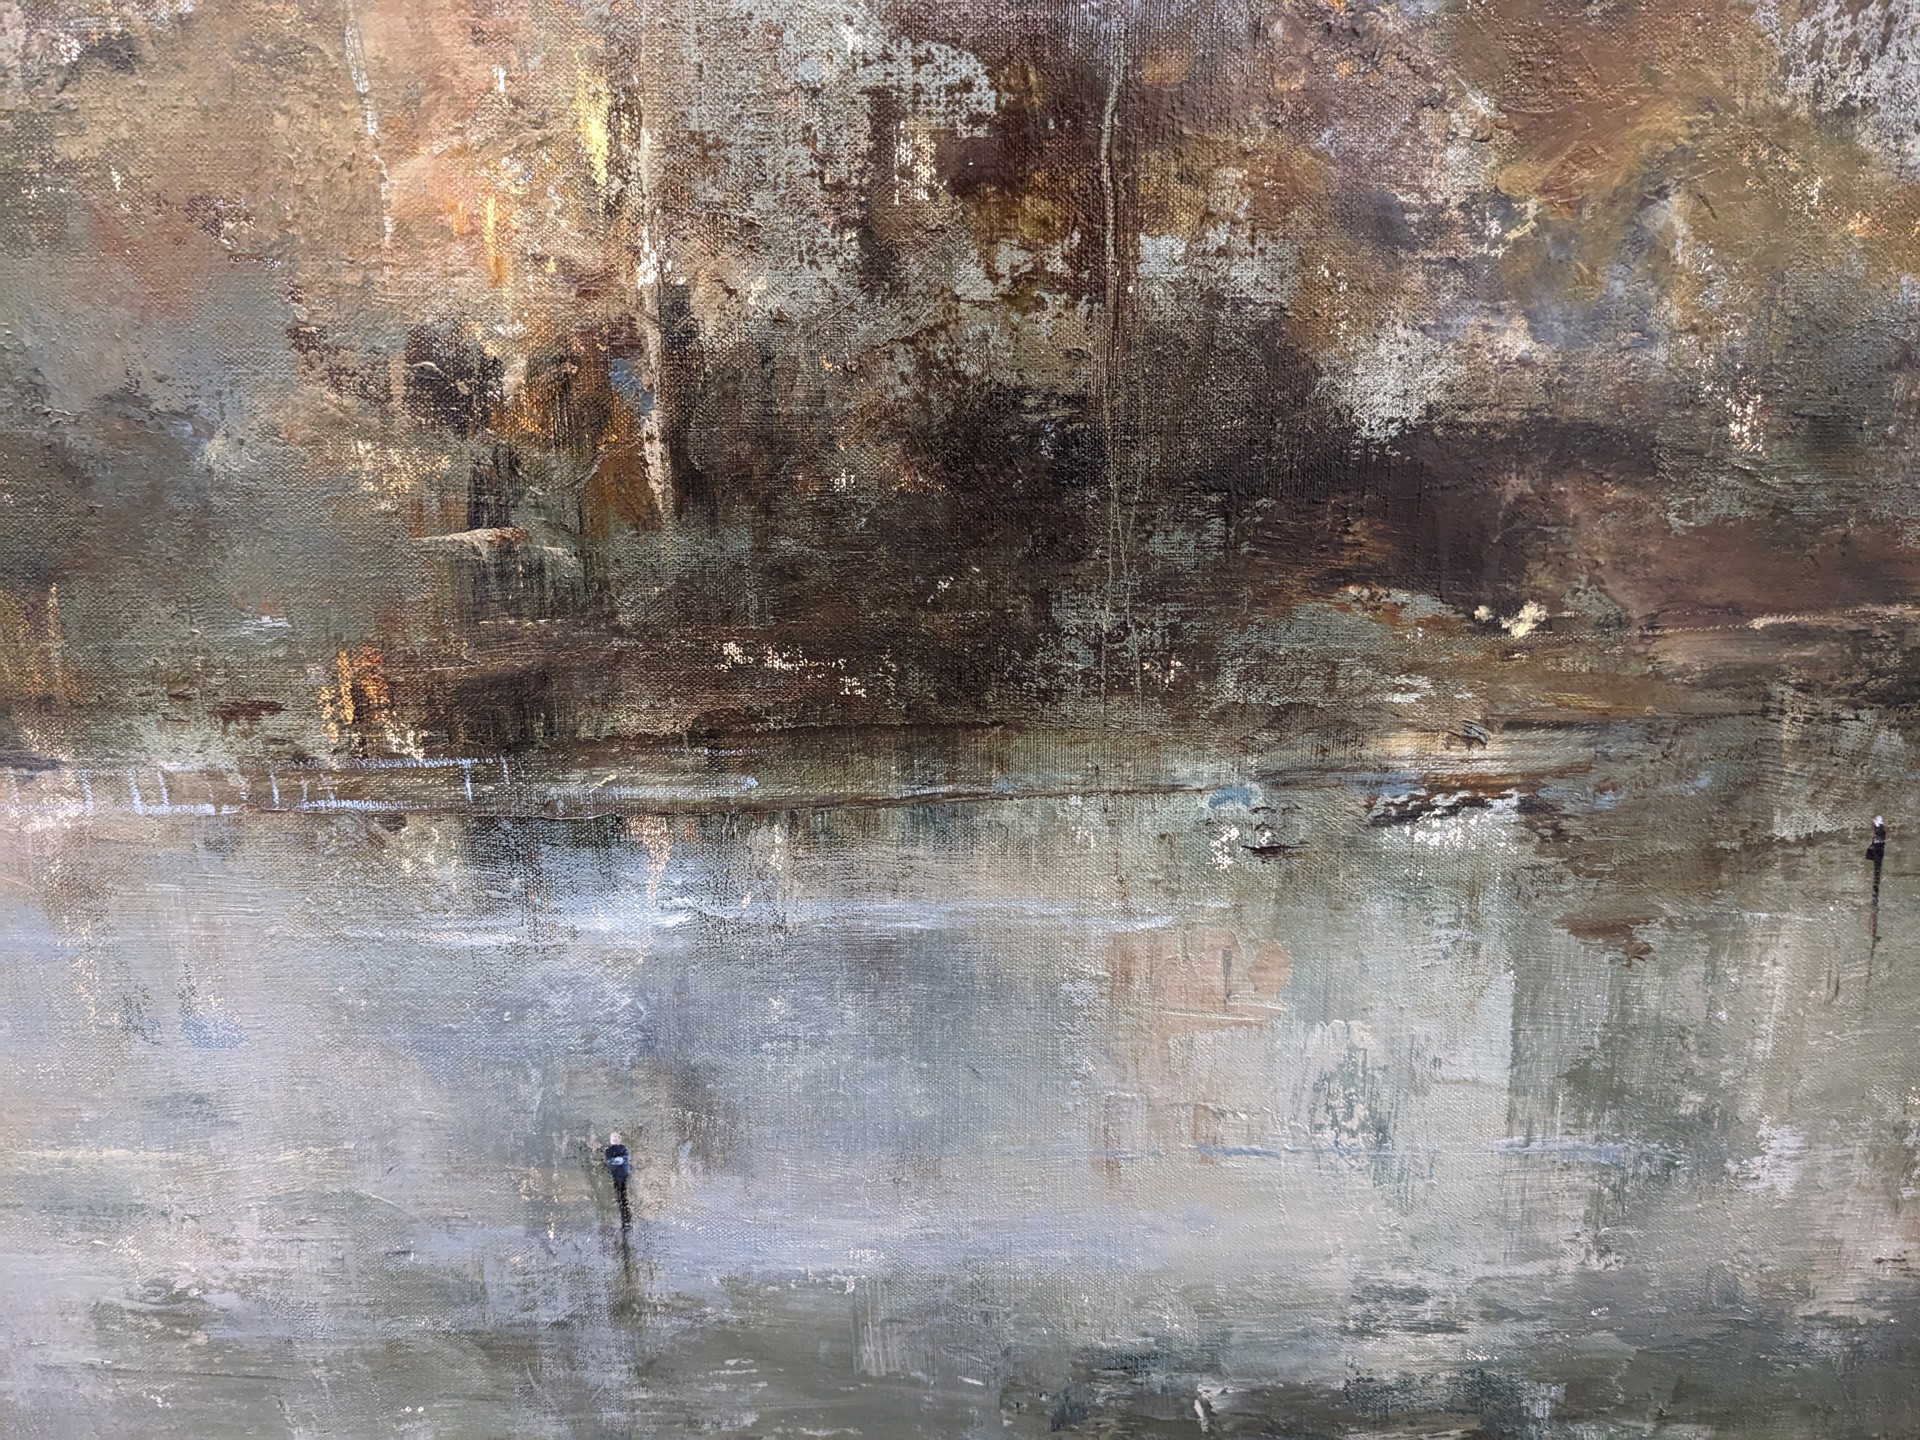 Till the wind shakes a thousand whispers by France Jodoin